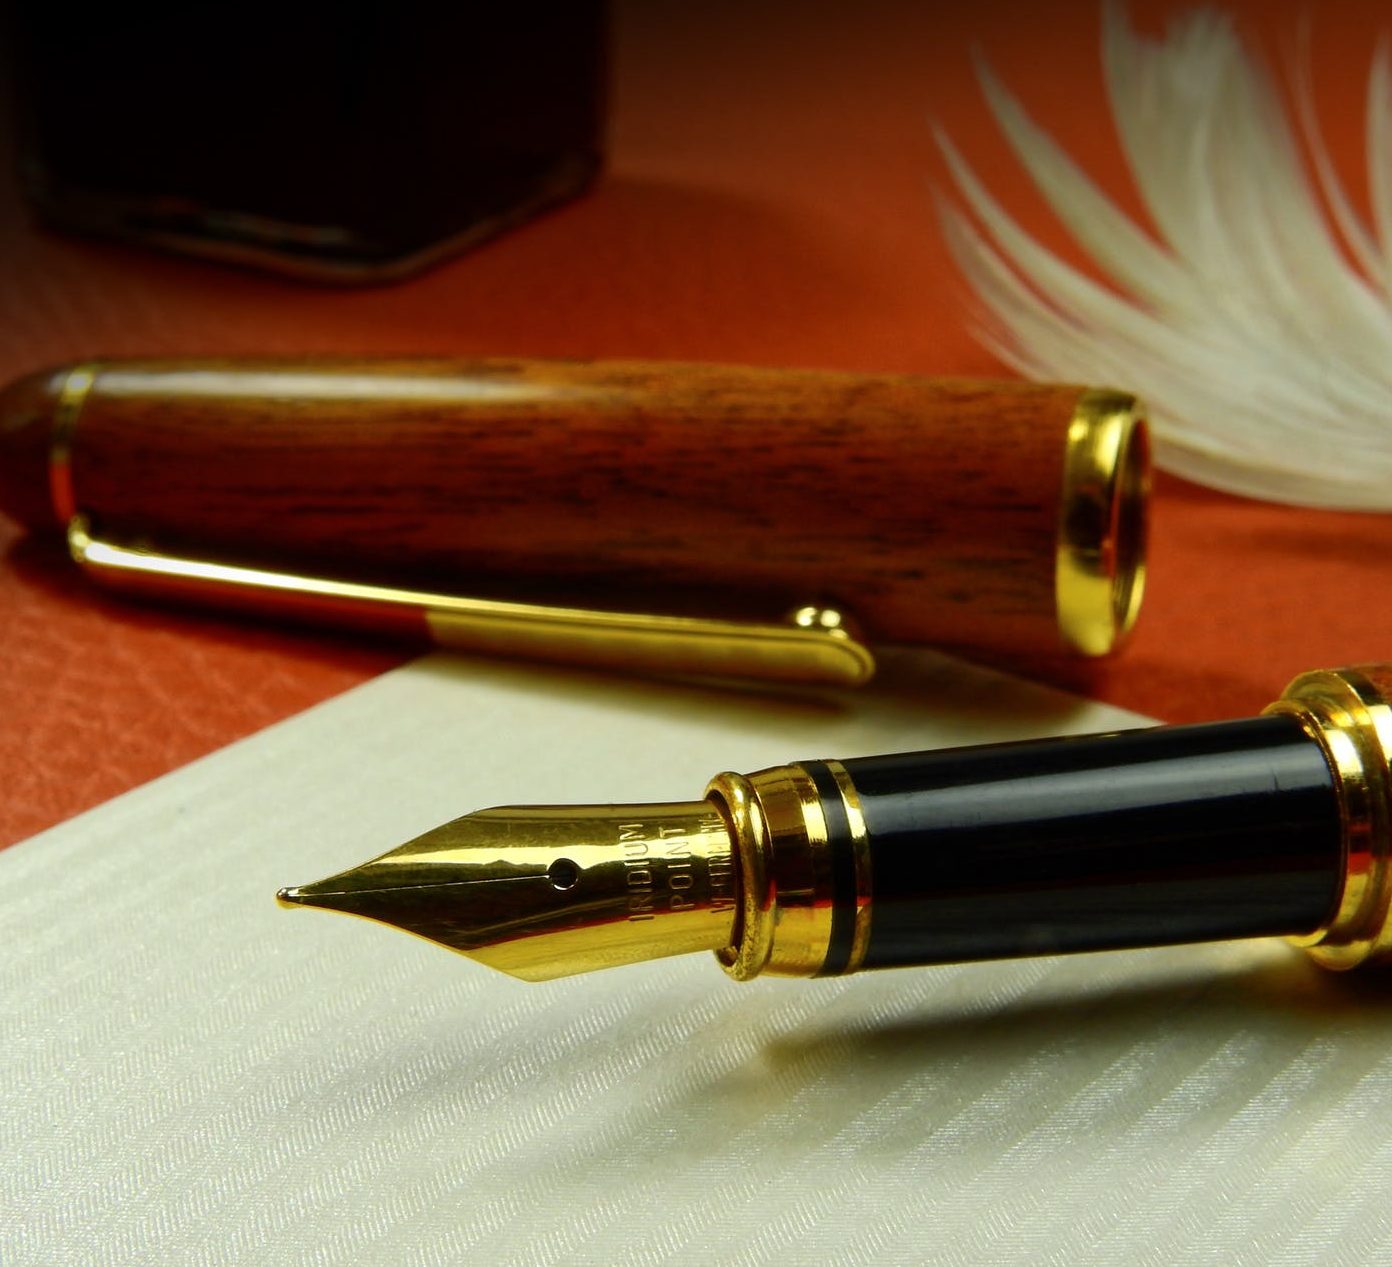 Opened fountain pen, focus on the nib with the cap in the background.